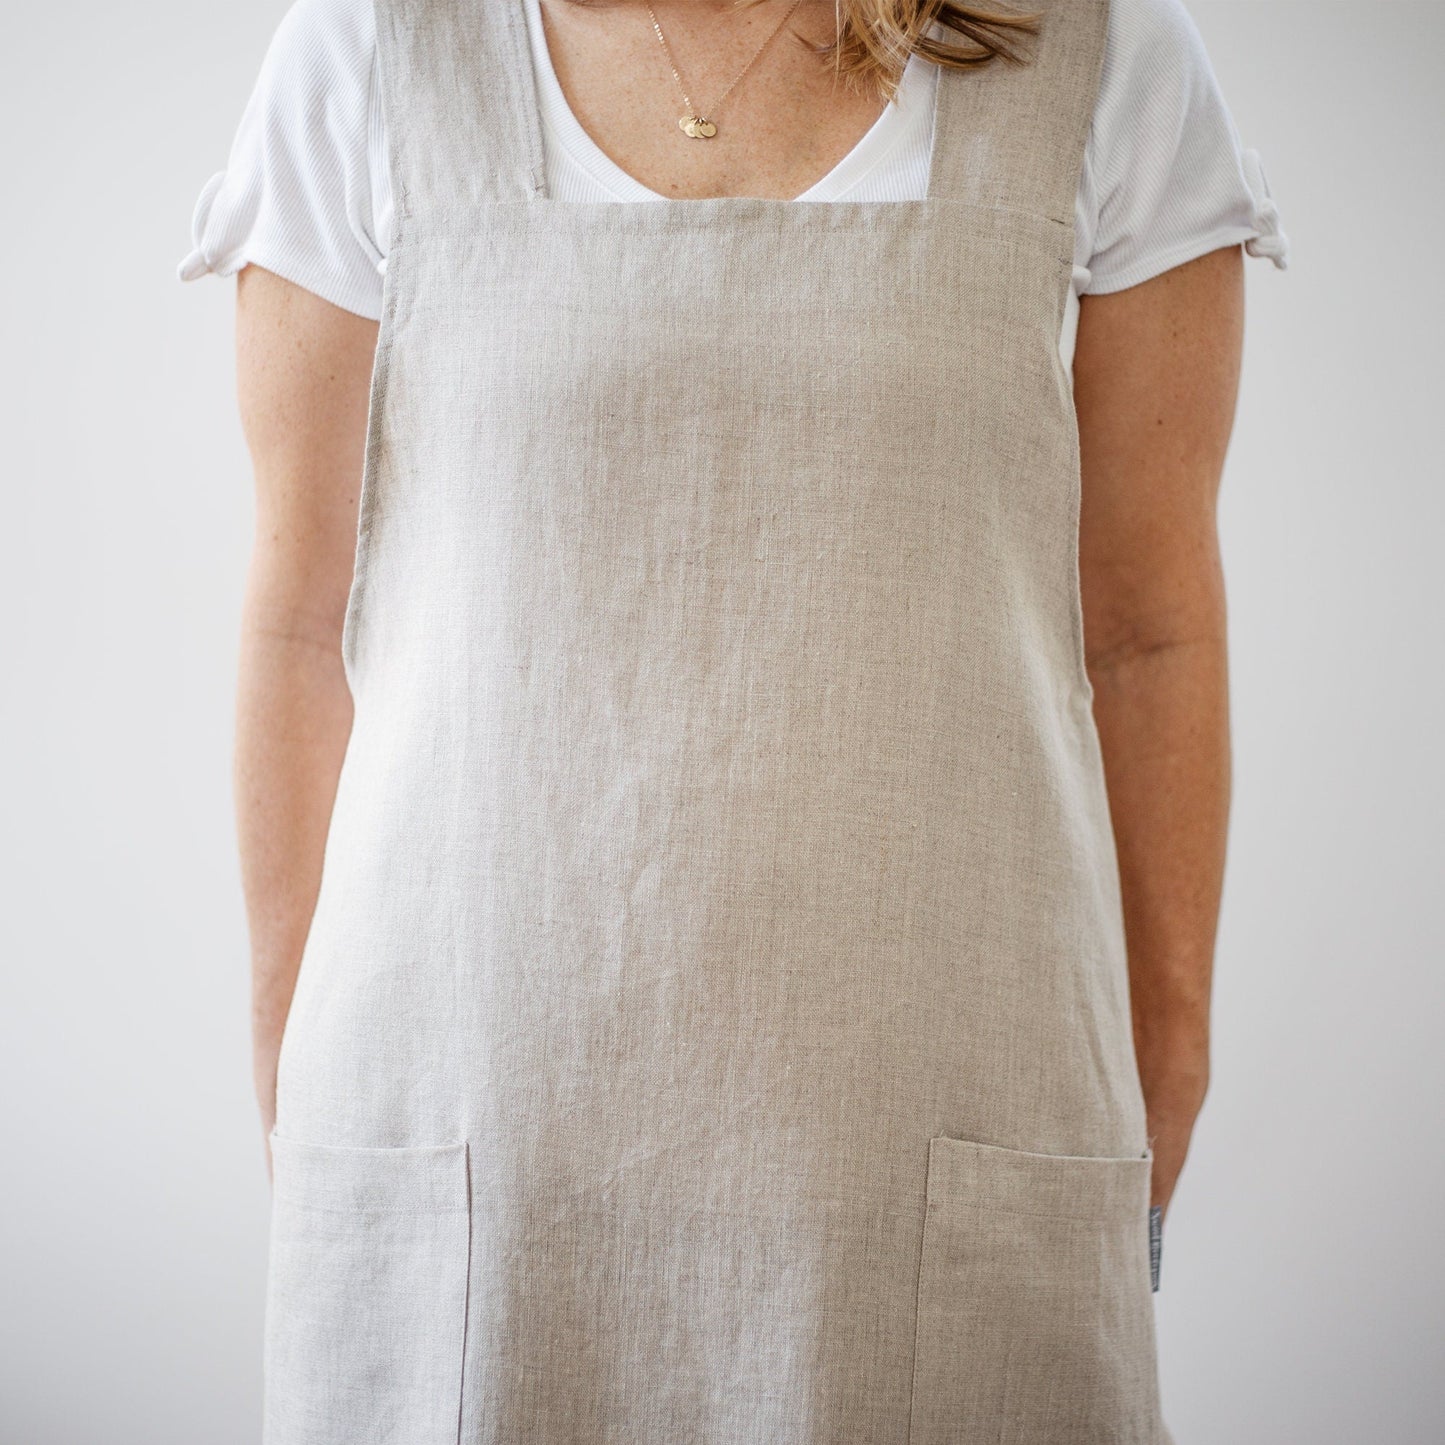 Load image into Gallery viewer, Linen Apron | Kitchen Apron | Full Apron | Full Kitchen Apron |  Apron | Vintage Apron | Apron Gift | Full Linen Kitchen Apron | Linen Apron
